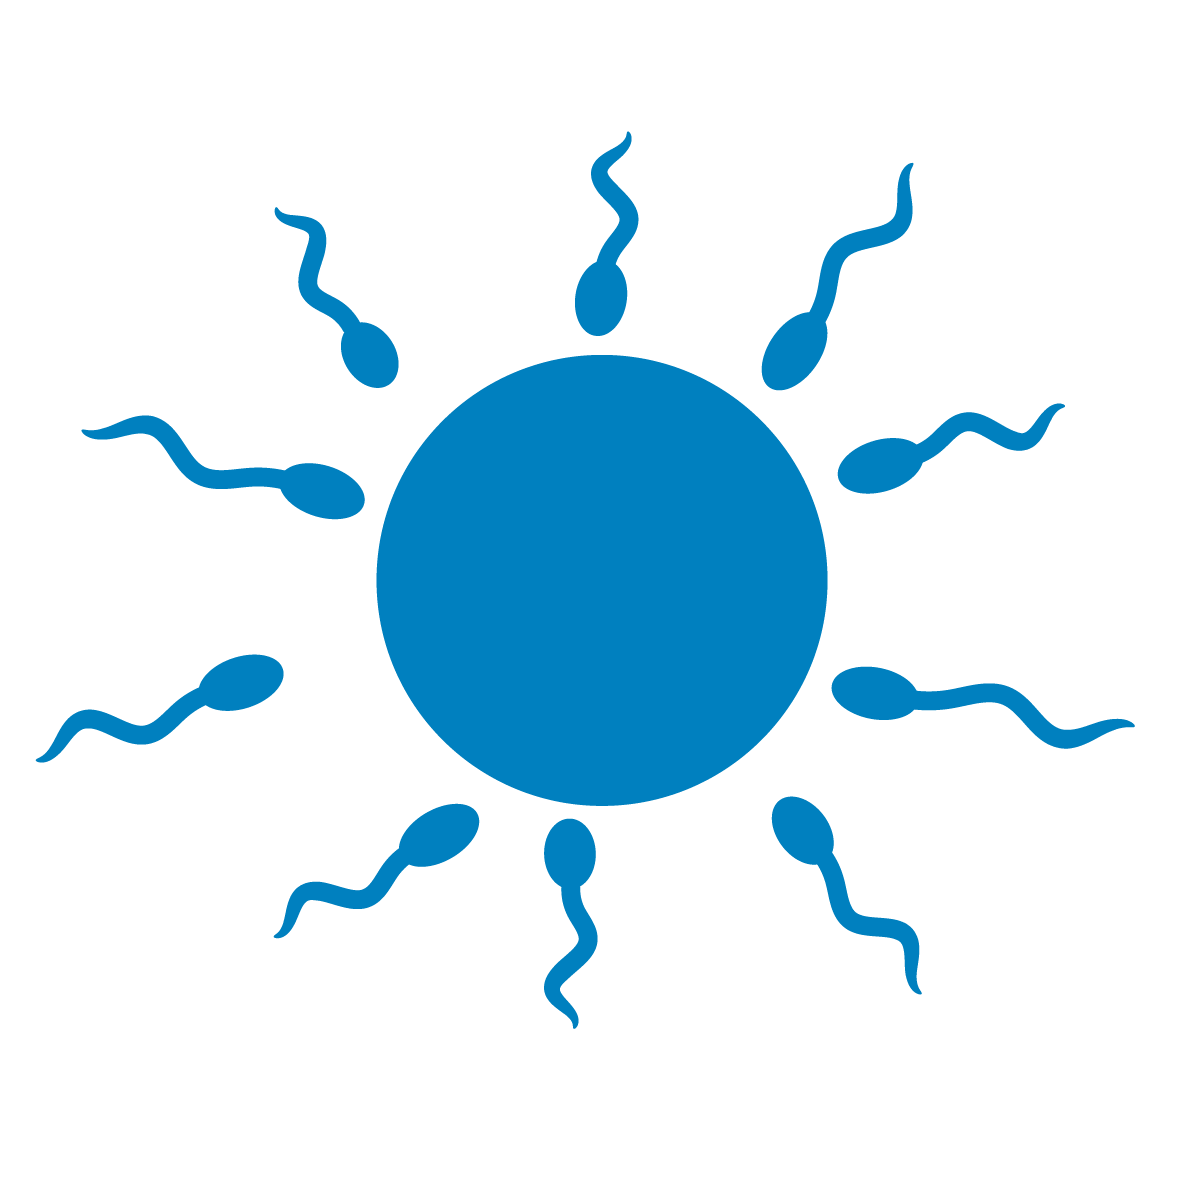 A graphic of a sperm and egg ultramartine